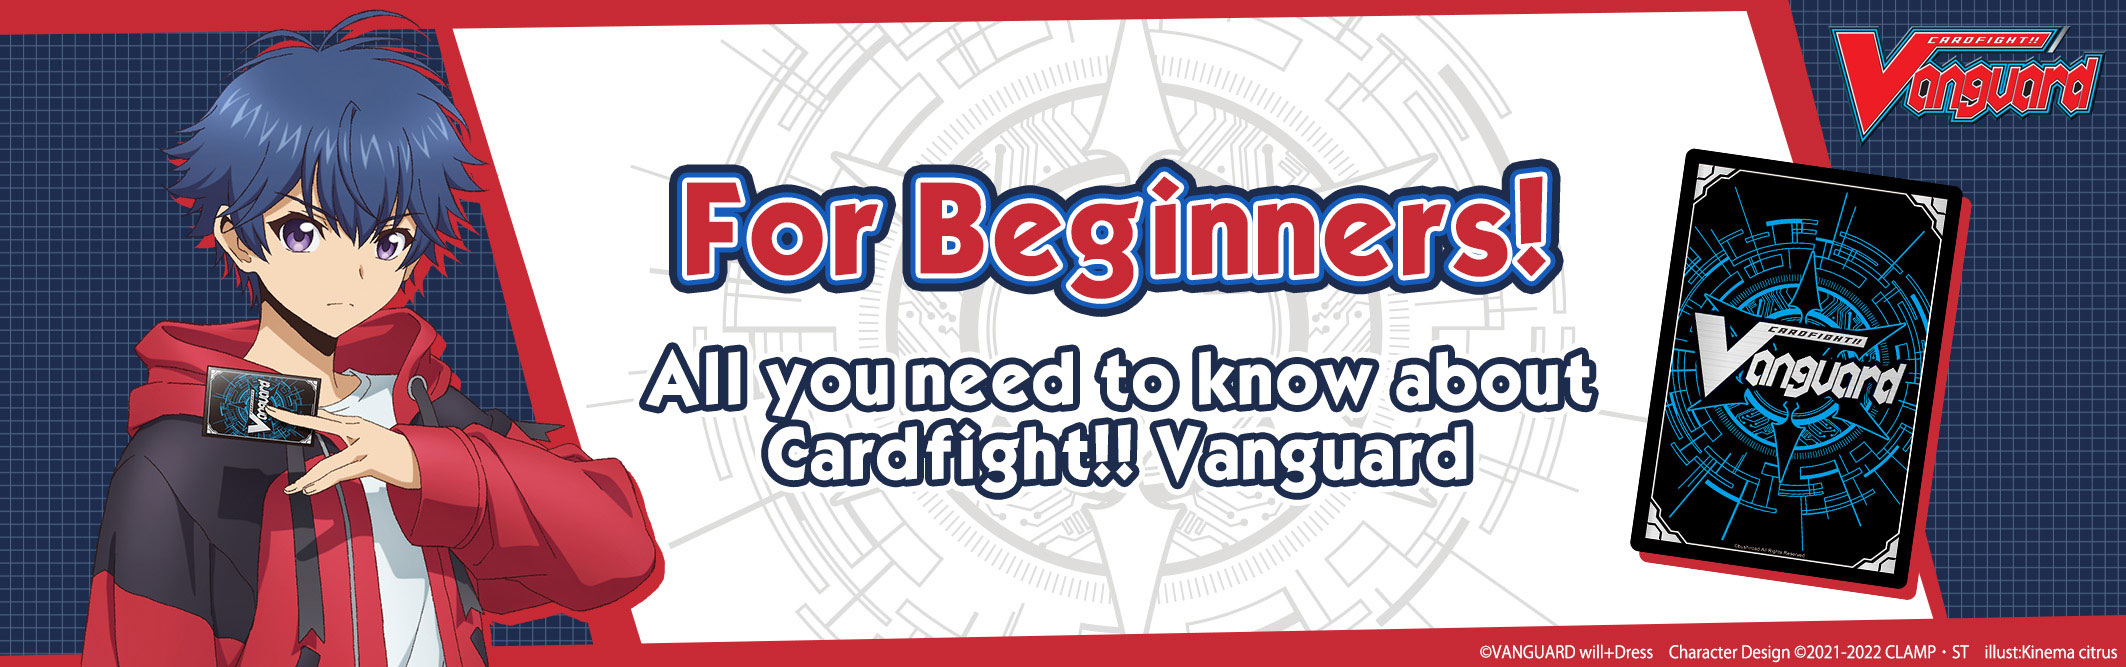 Seasons 1, 2 and 3 all confirmed for Cardfight!! Vanguard will+Dress